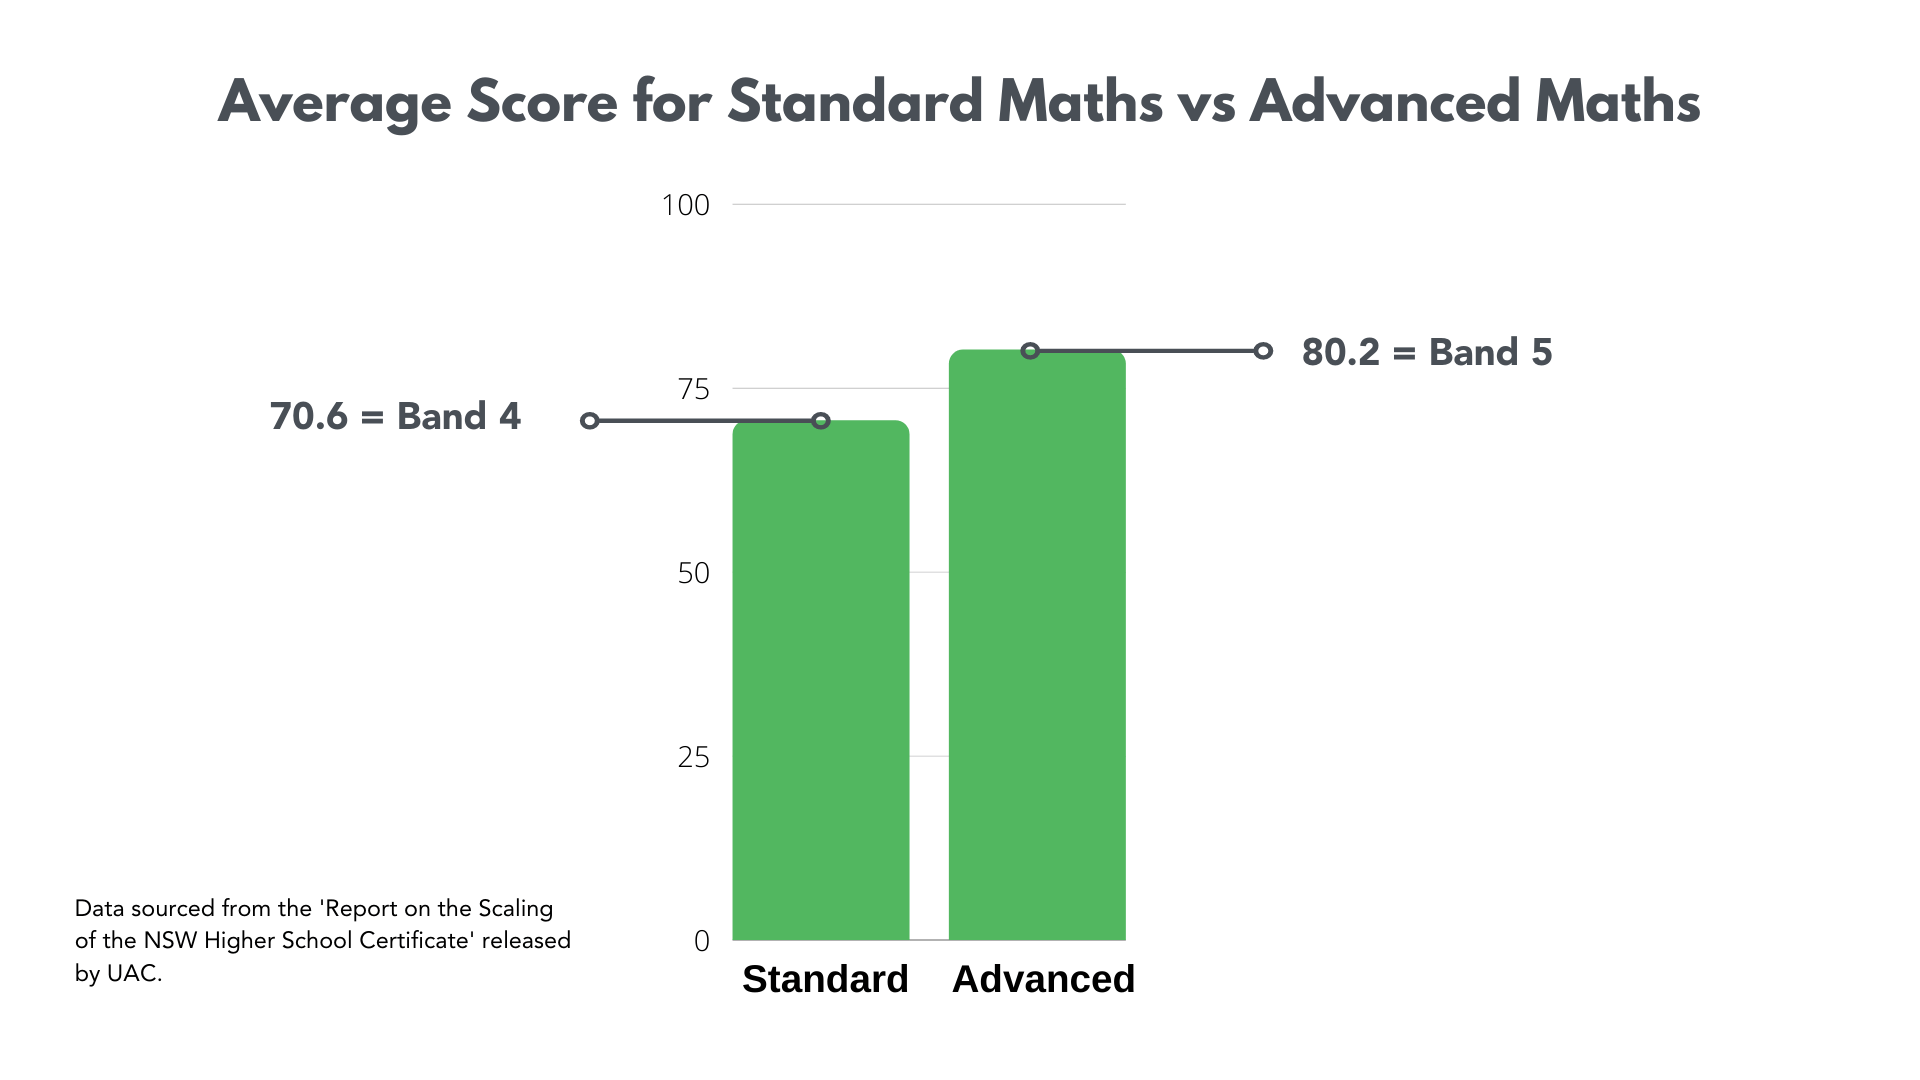 Average score for Standard and Advanced Maths